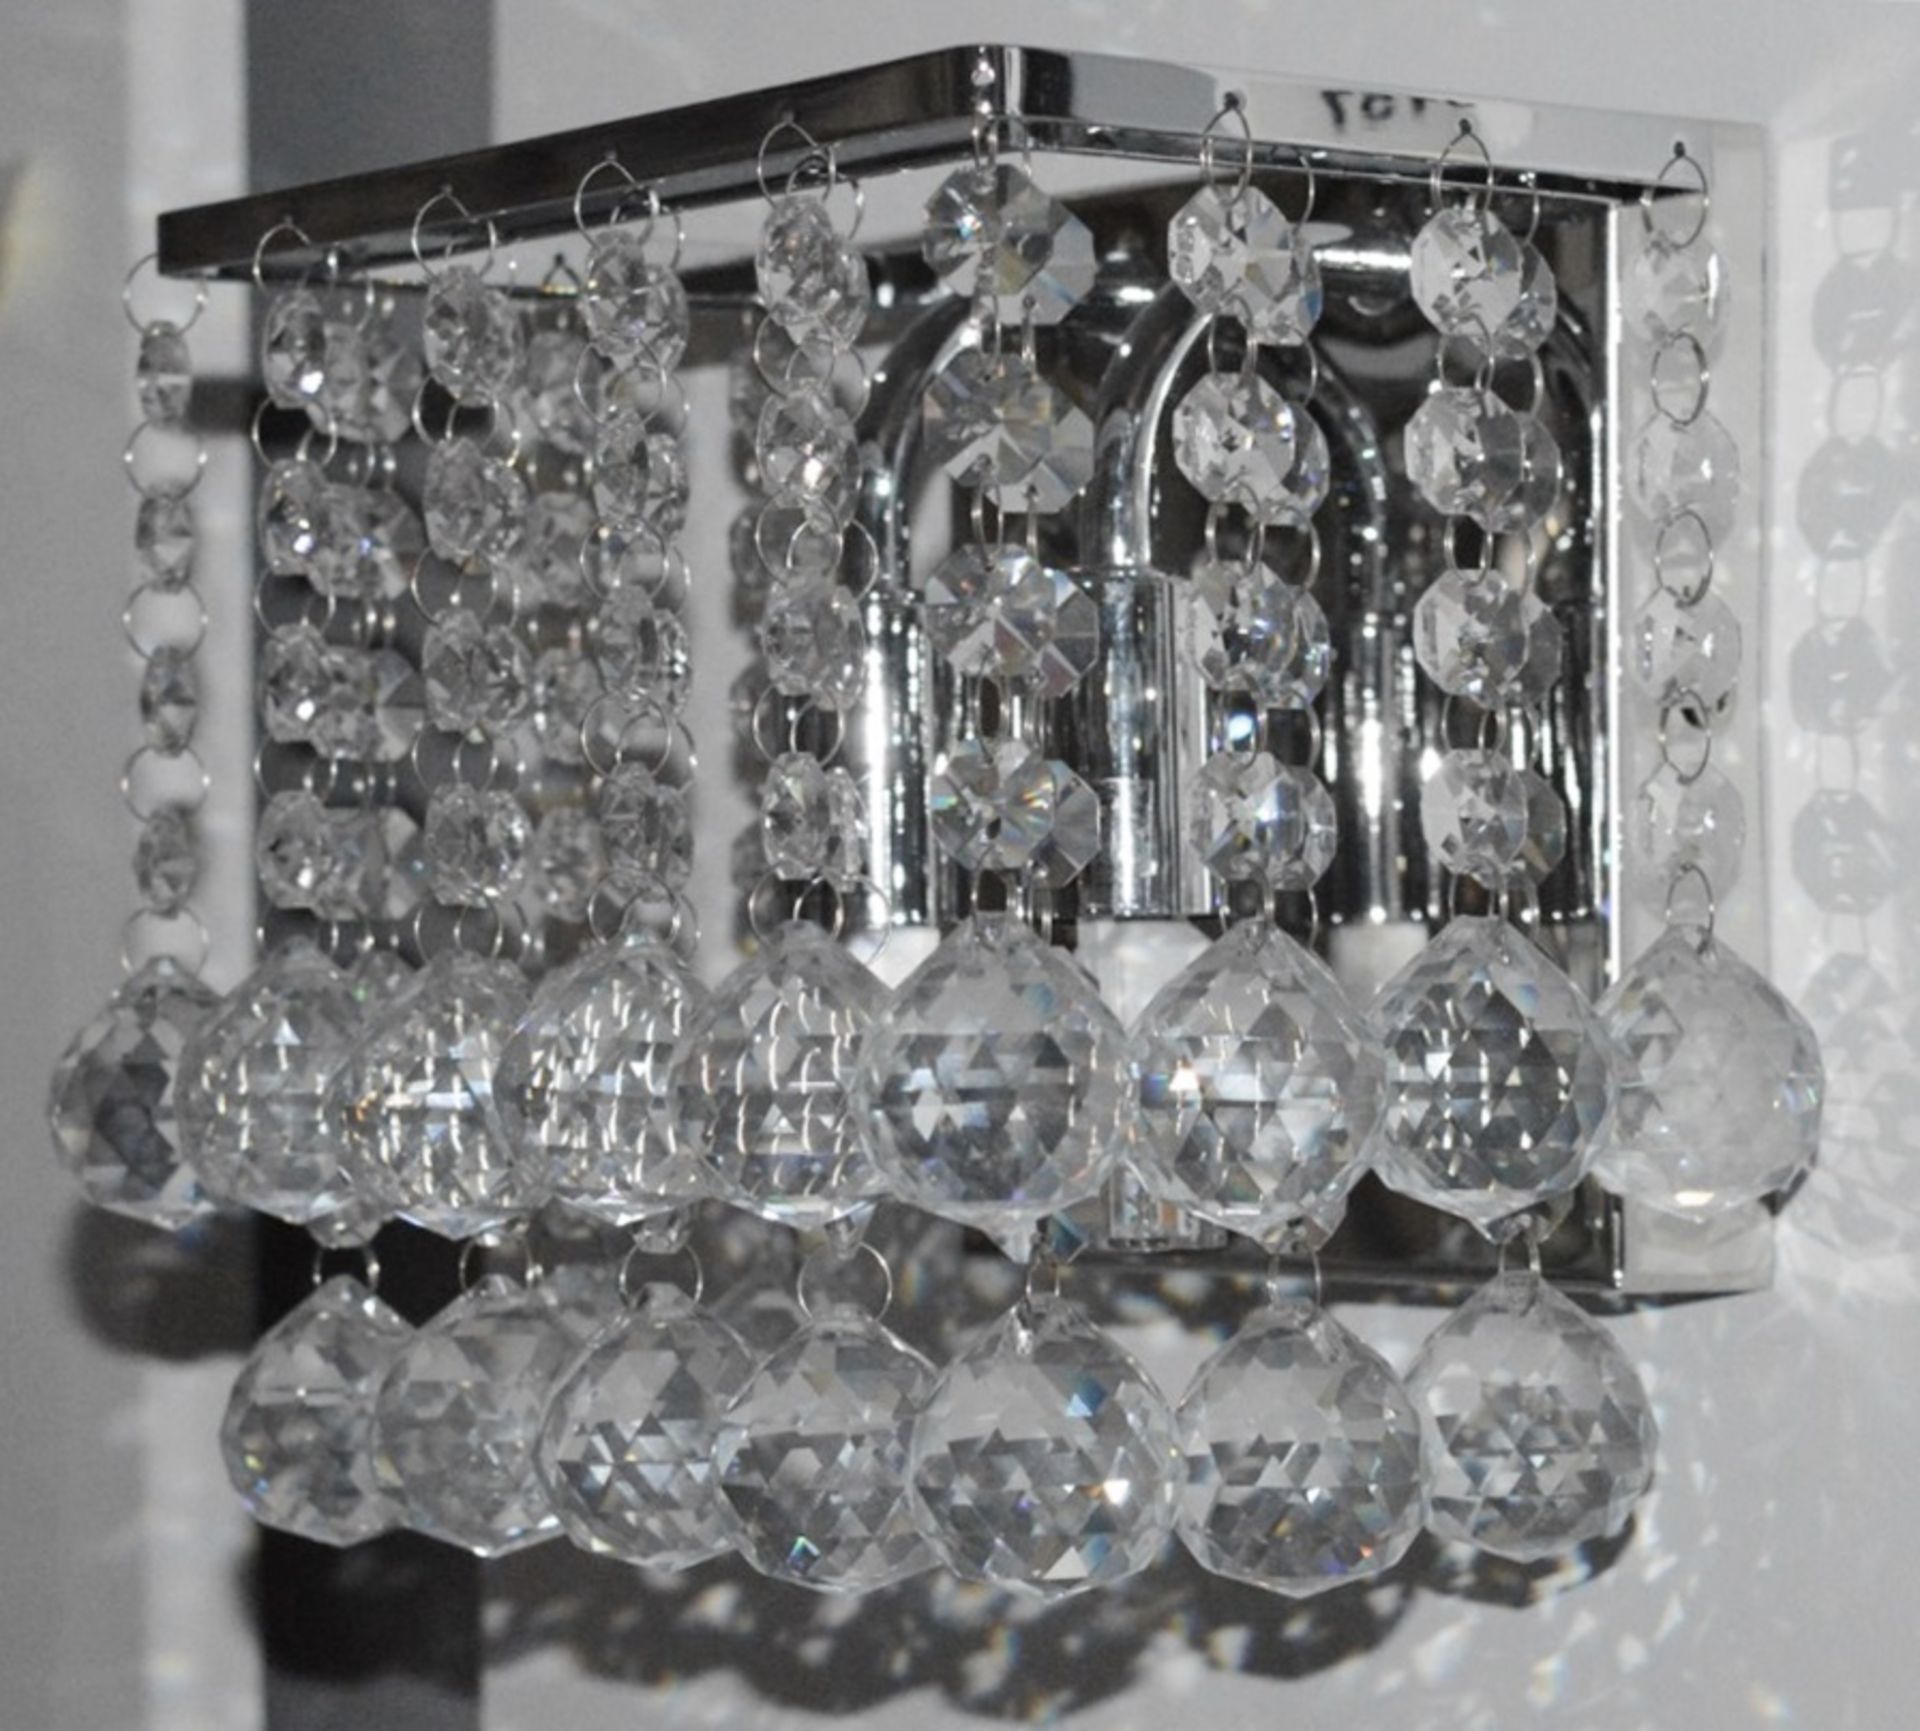 1 x Hanna Chrome 2 Light Square Wall Bracket With Clear Crystal Balls - Ex Display - RRP £67.20 - Image 3 of 3